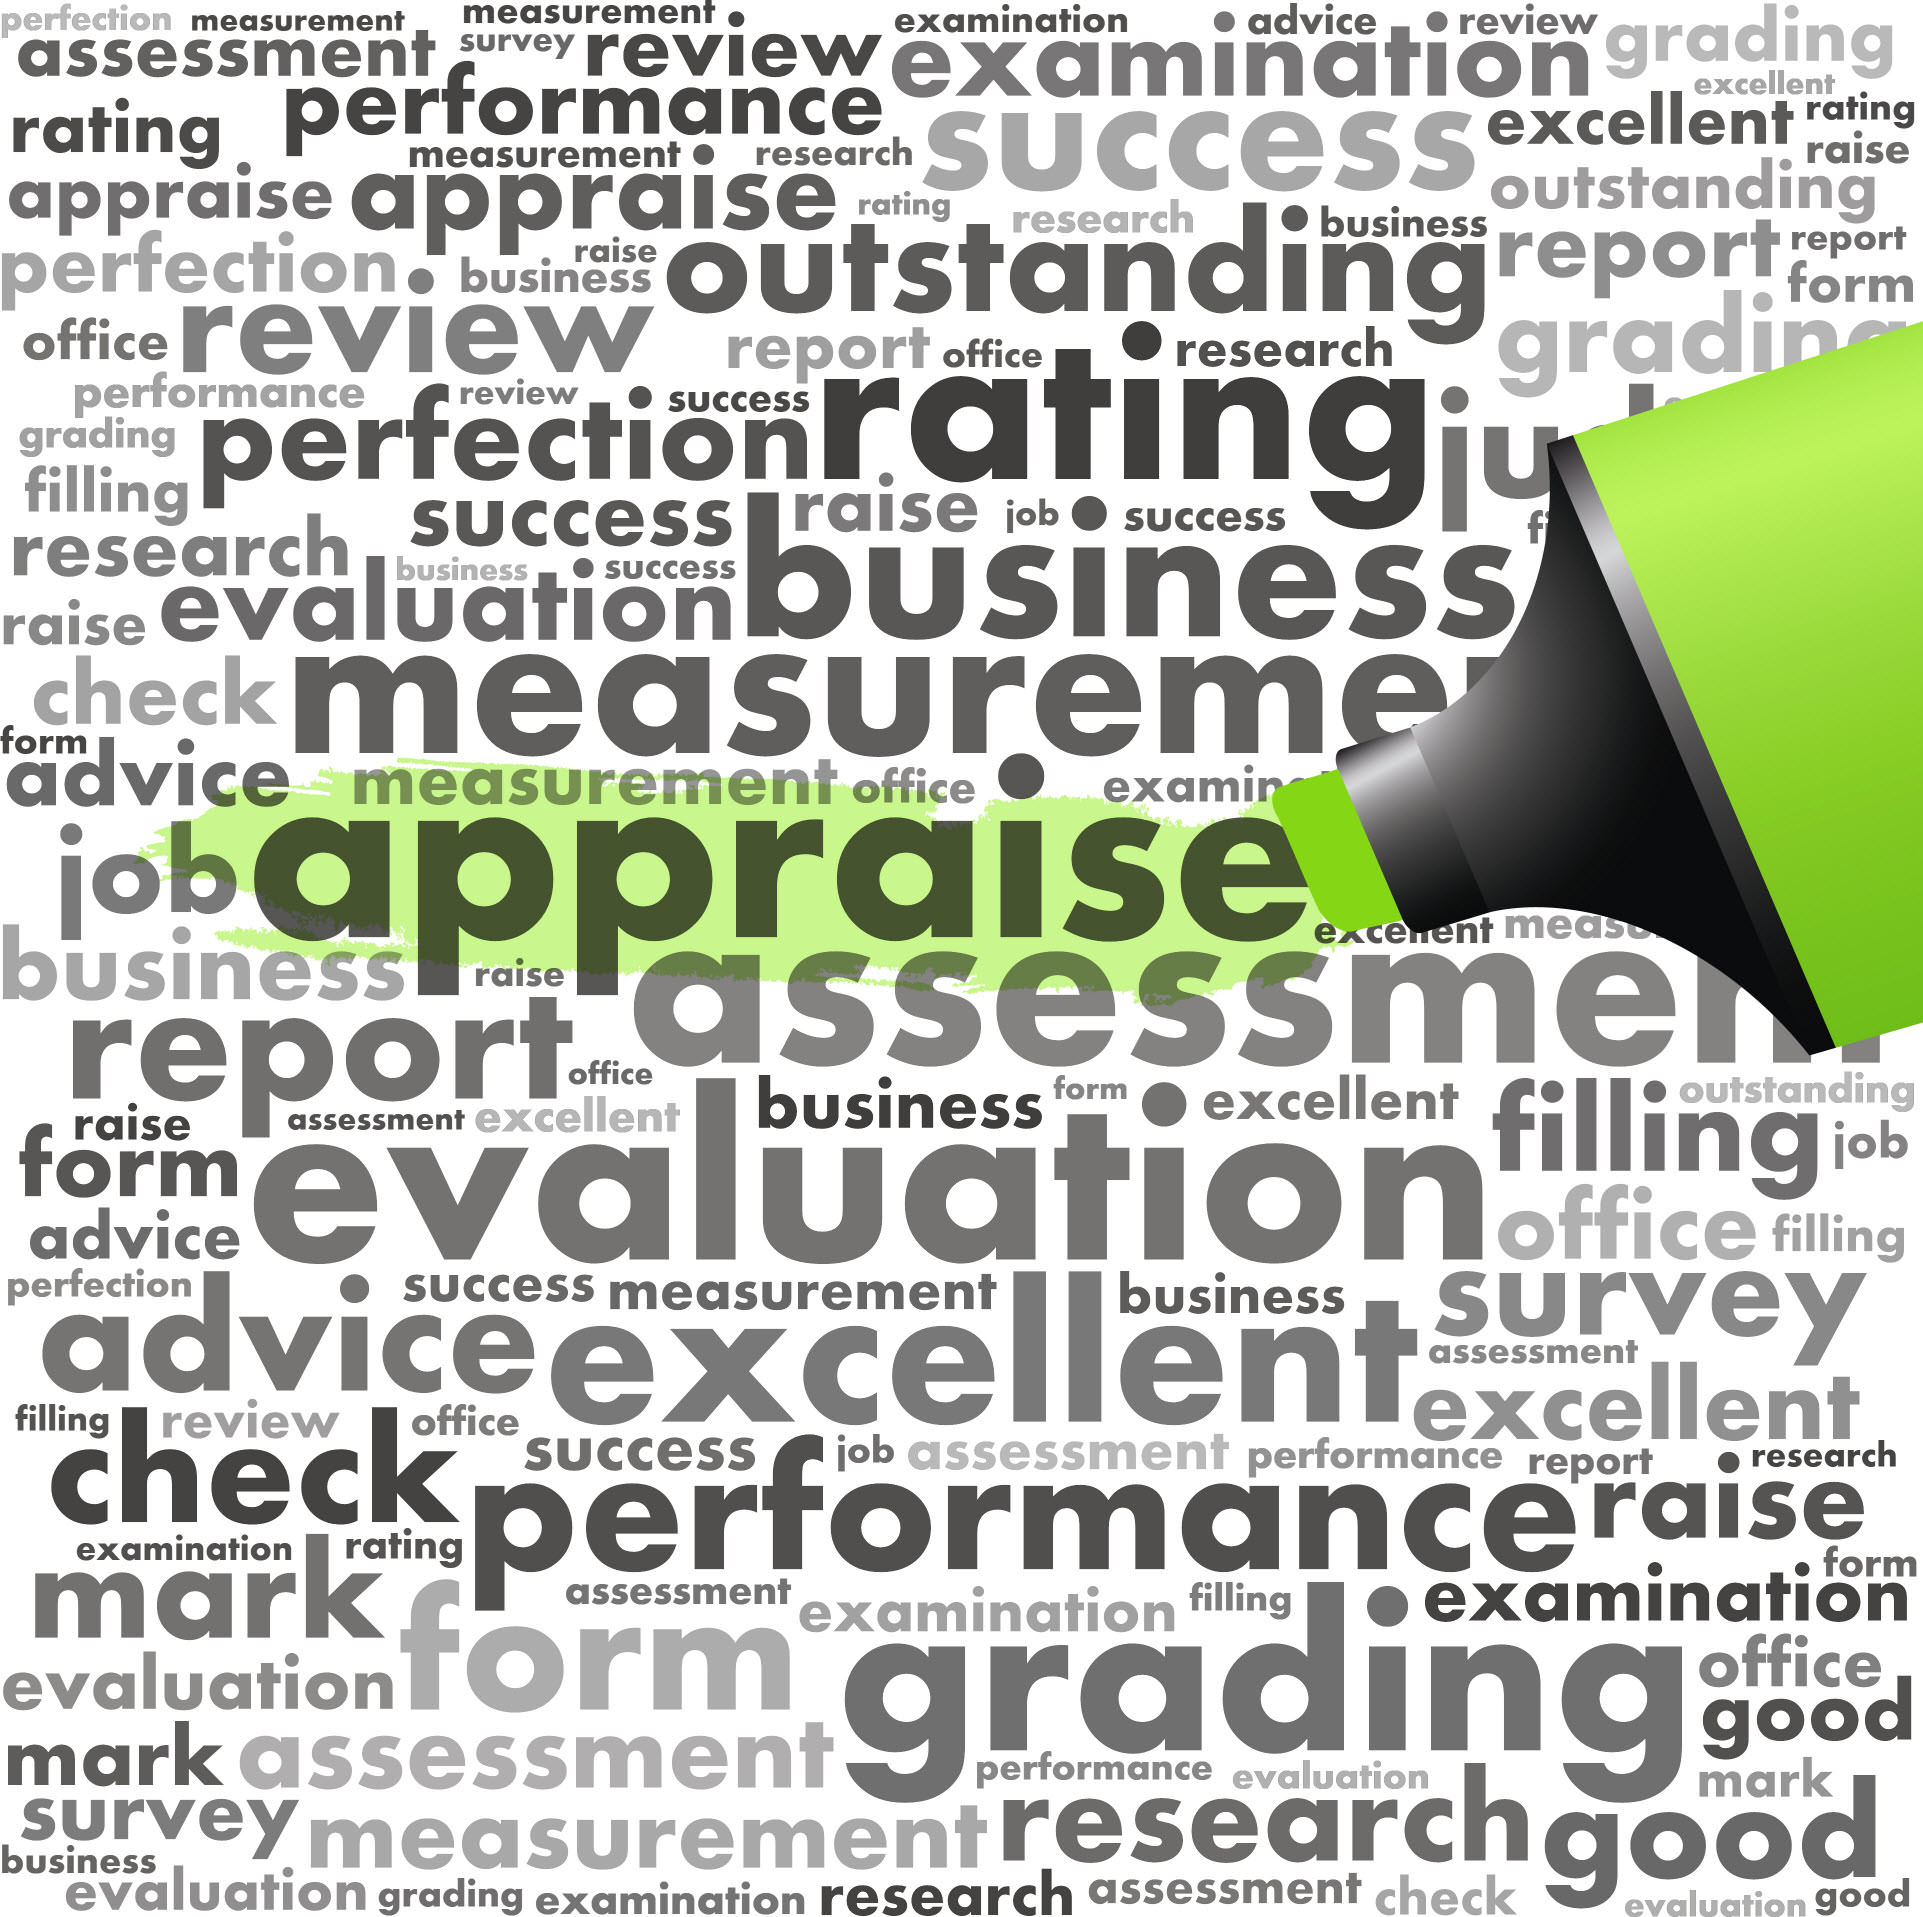 Performance Appraisal Outcomes   Employee Evaluations